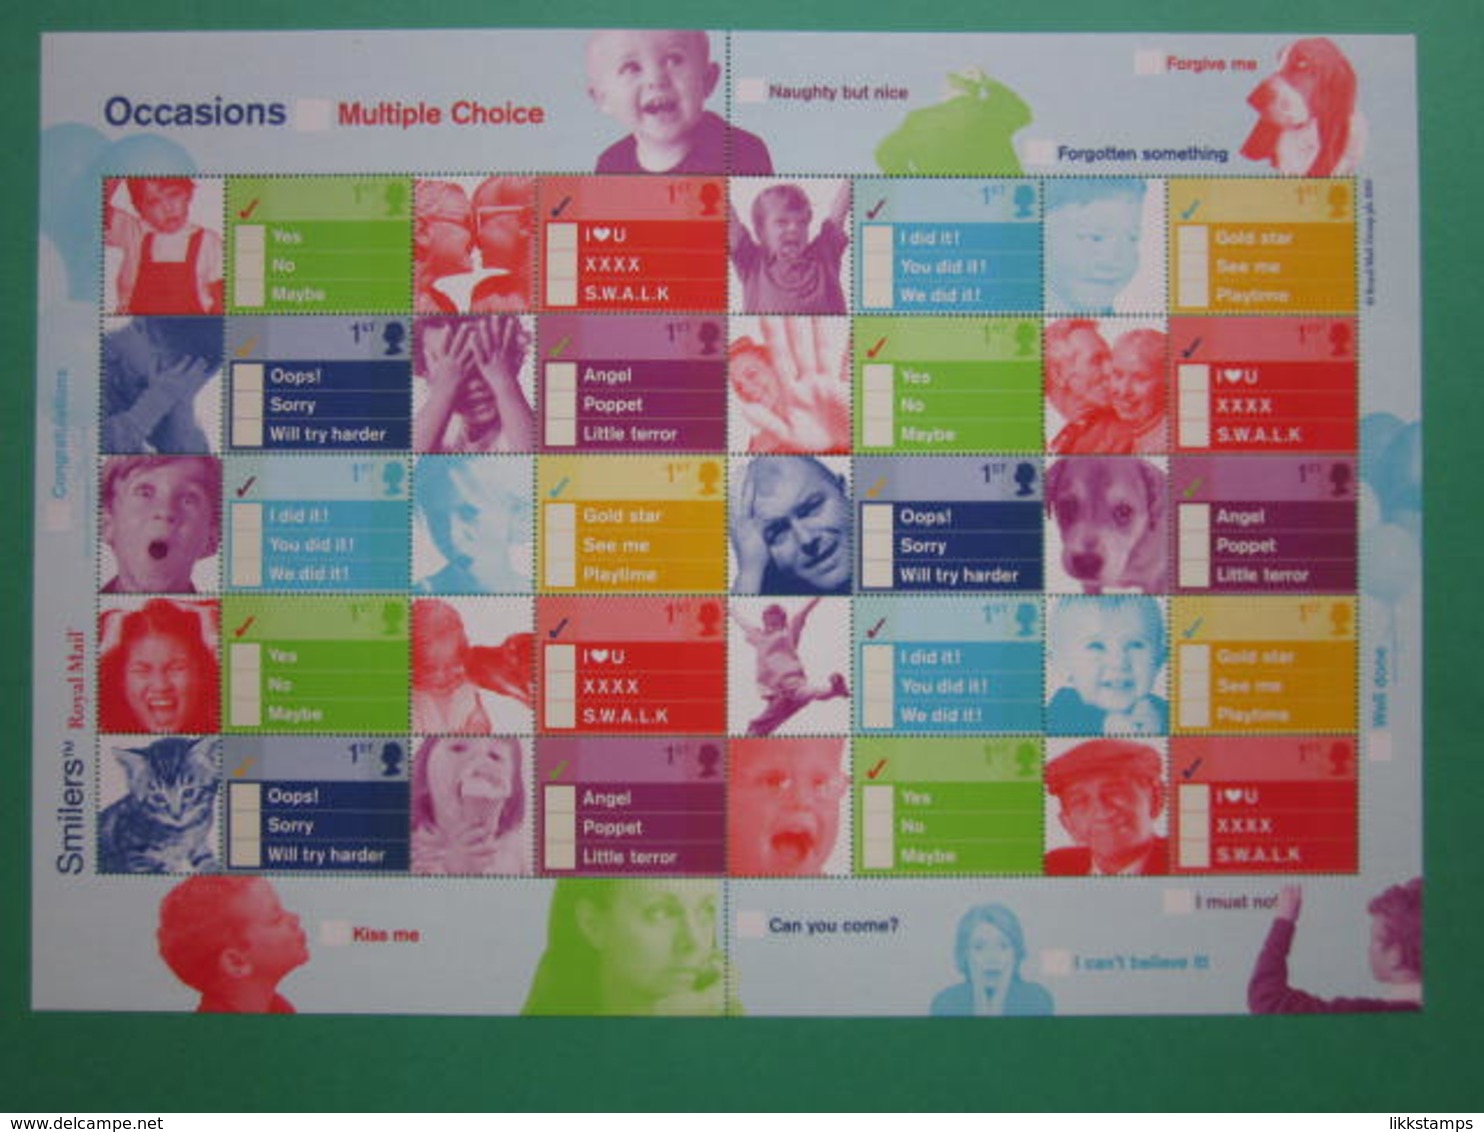 2003 ROYAL MAIL 'TICK BOX' OCCASIONS GENERIC SMILERS SHEET. #SS0015 - Timbres Personnalisés